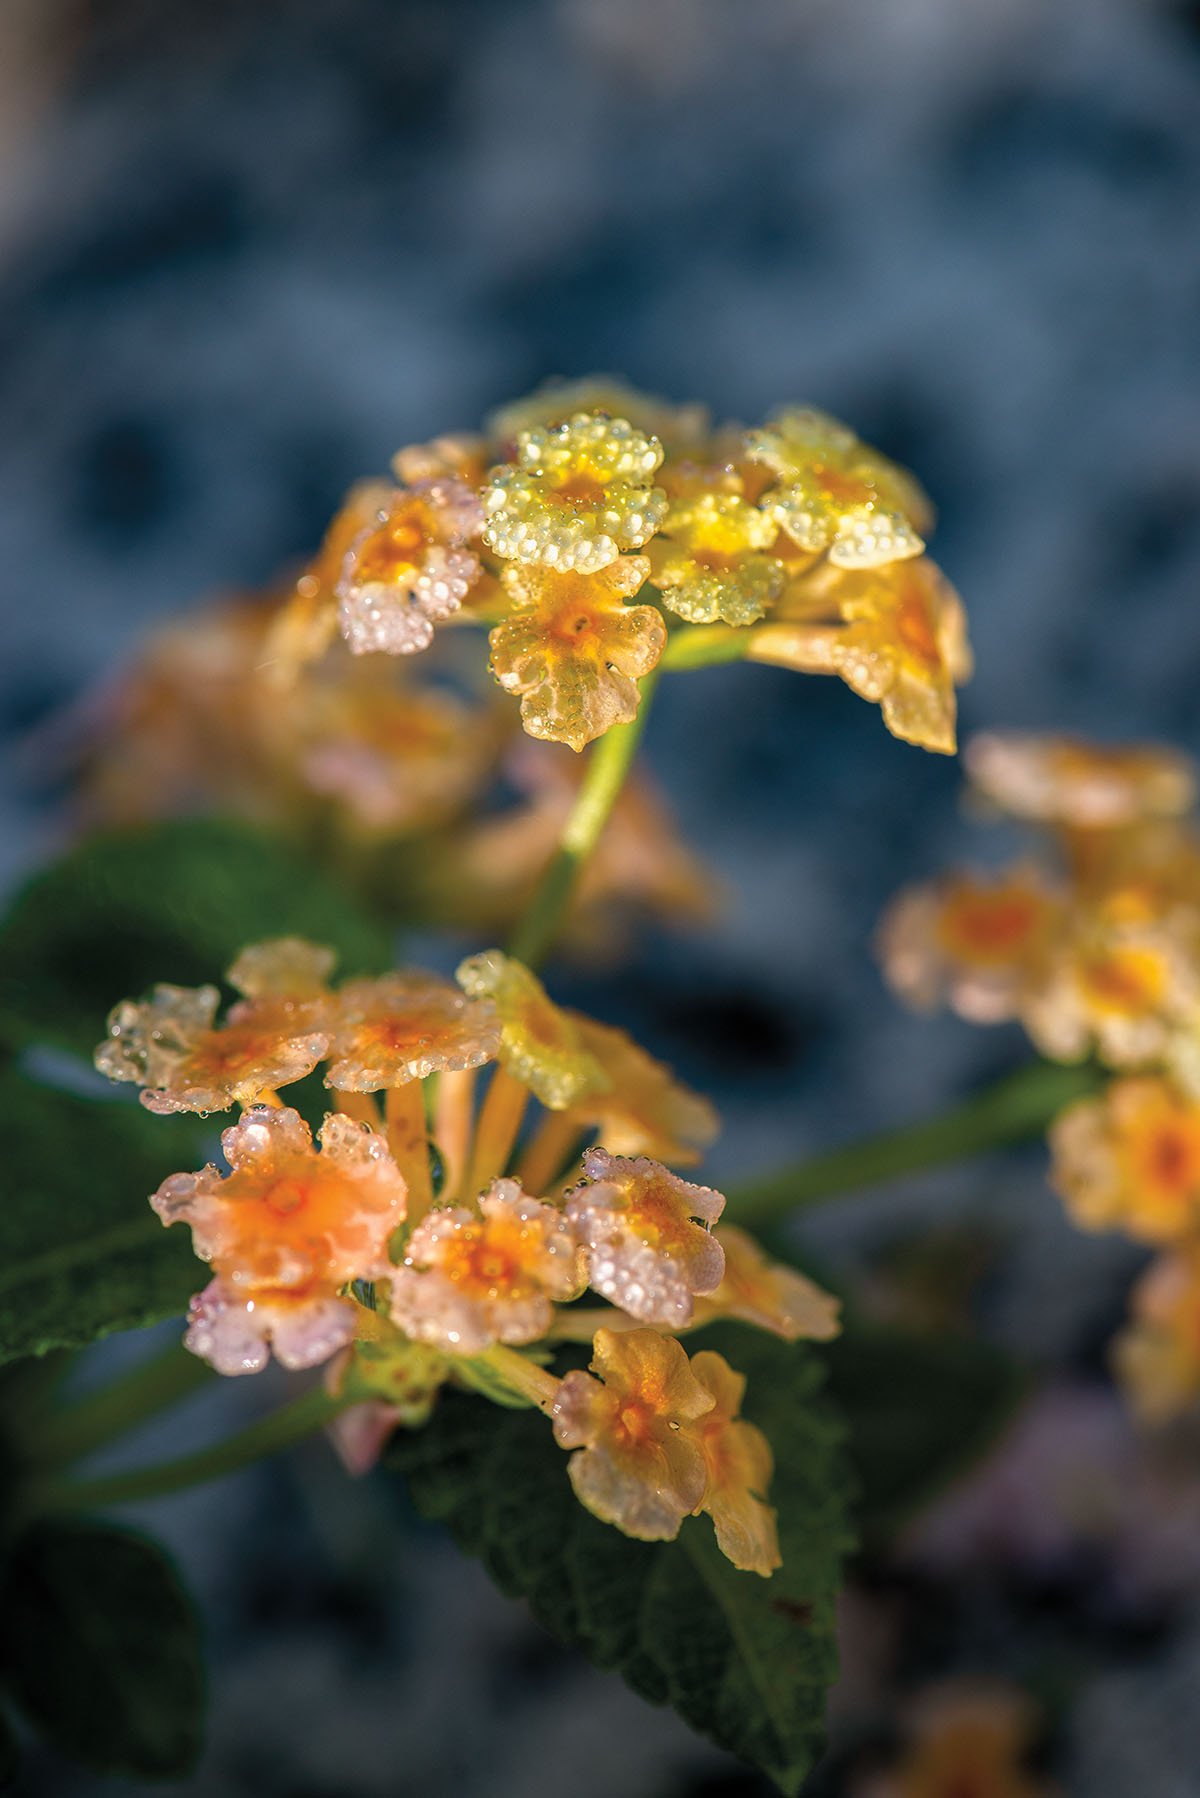 Golden yellow blooms with droplets of water